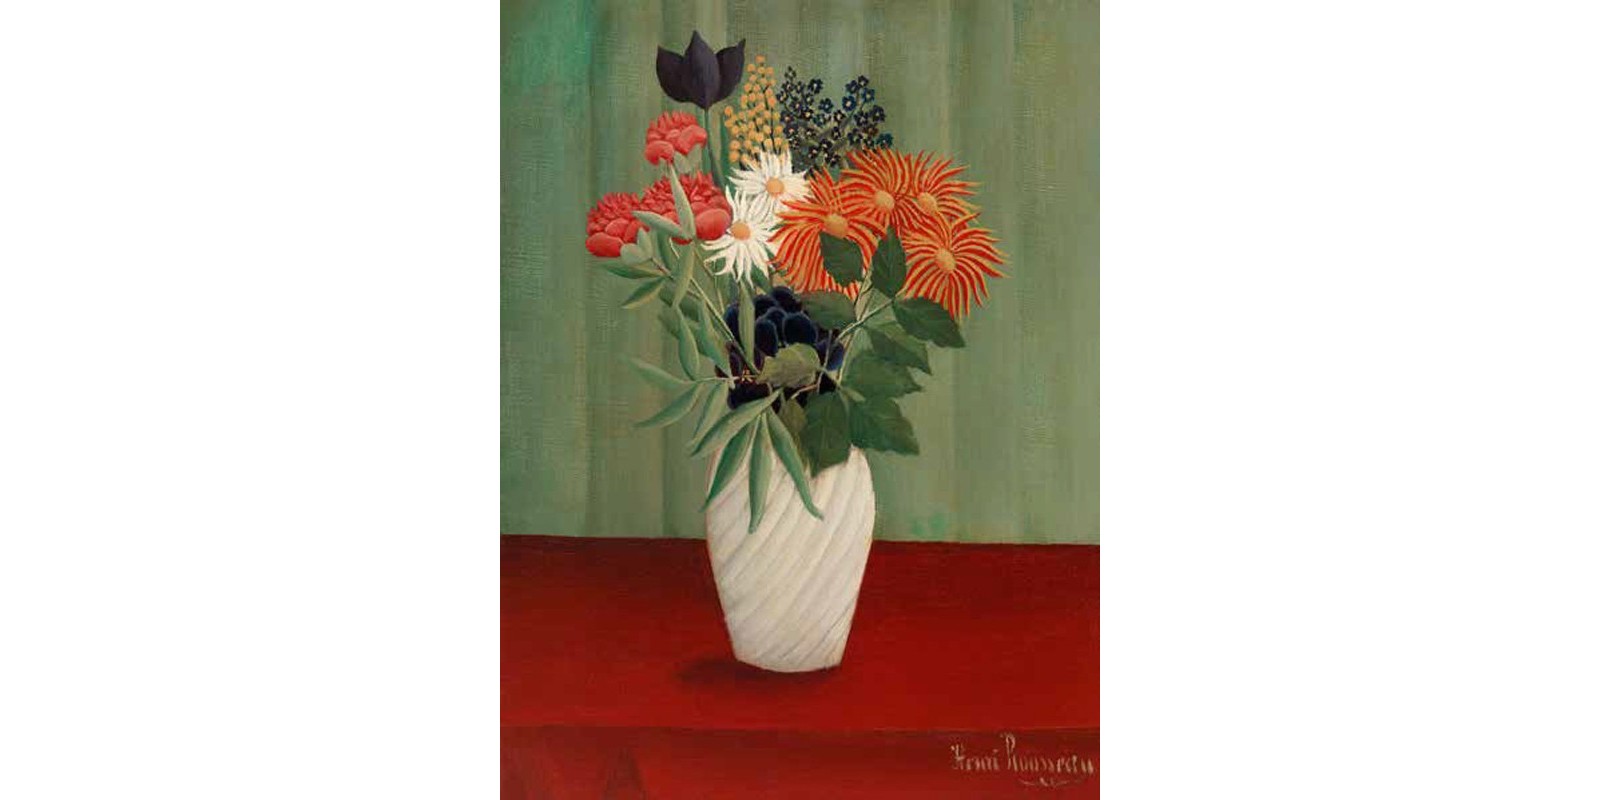 Henri Rousseau - Bouquet of Flowers with China Asters and Tokyos